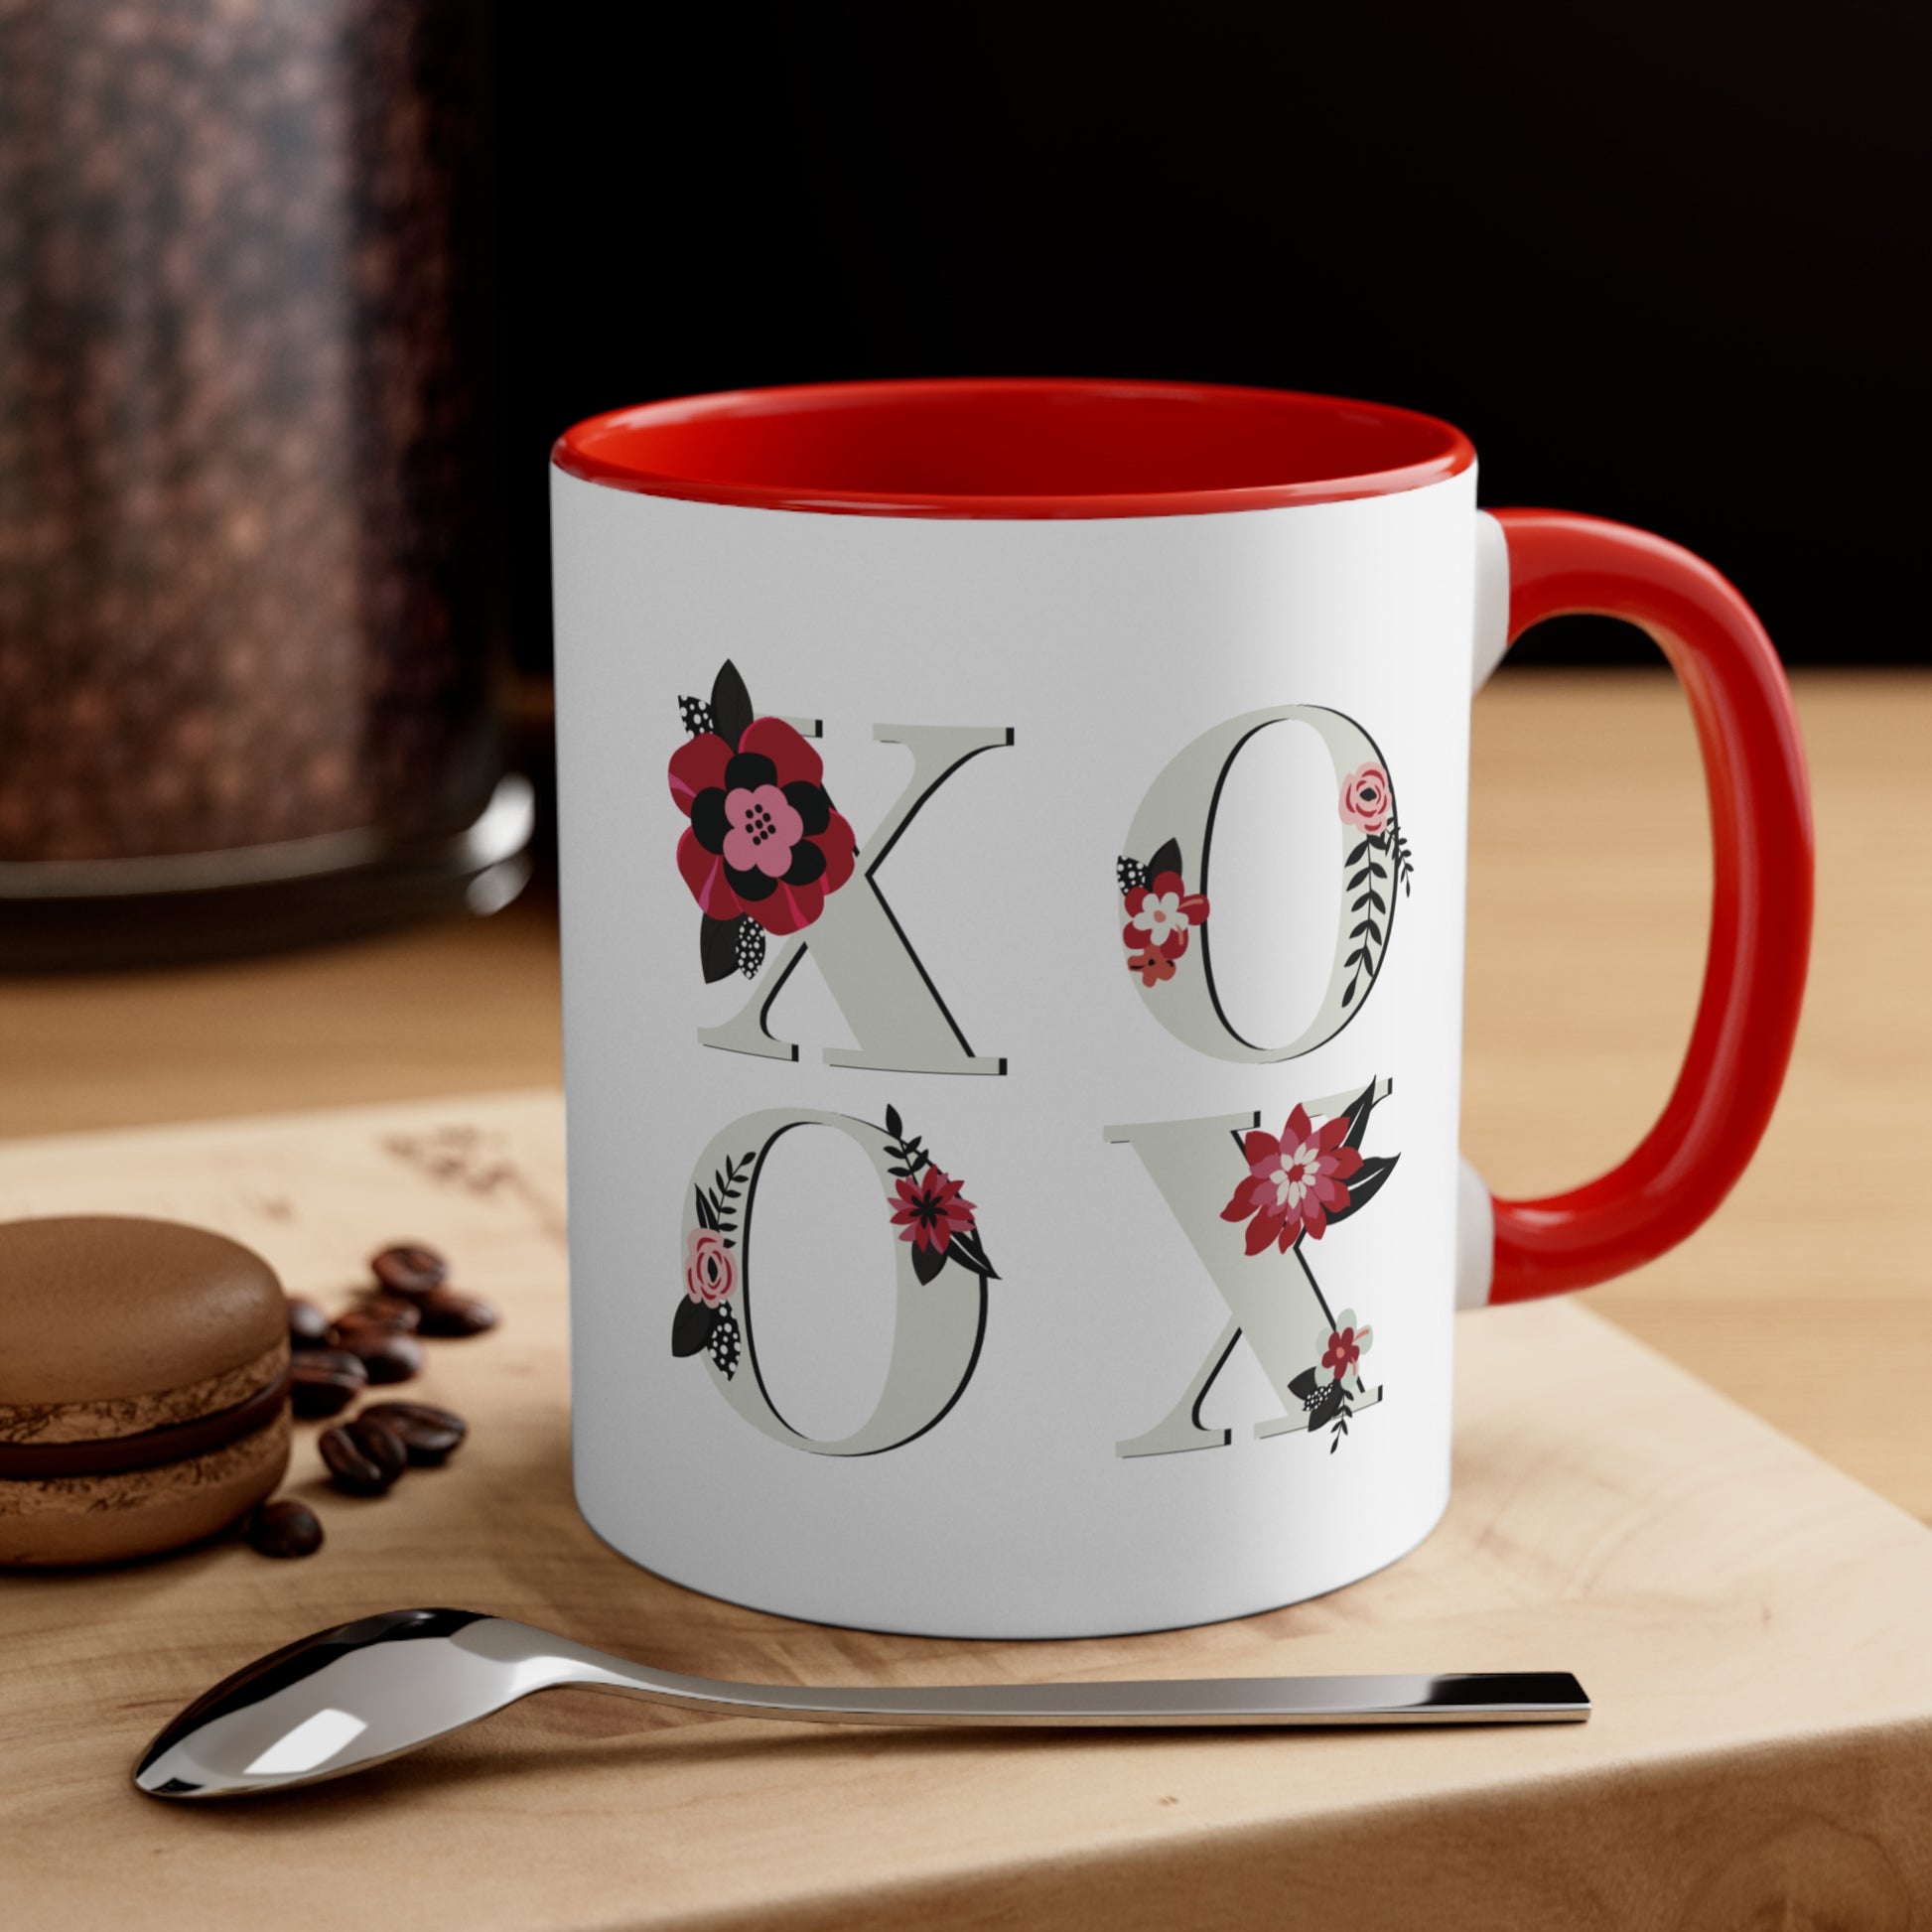 MOM XOXO 11oz ceramic accent coffee mug perfect for Mother's Day gift1